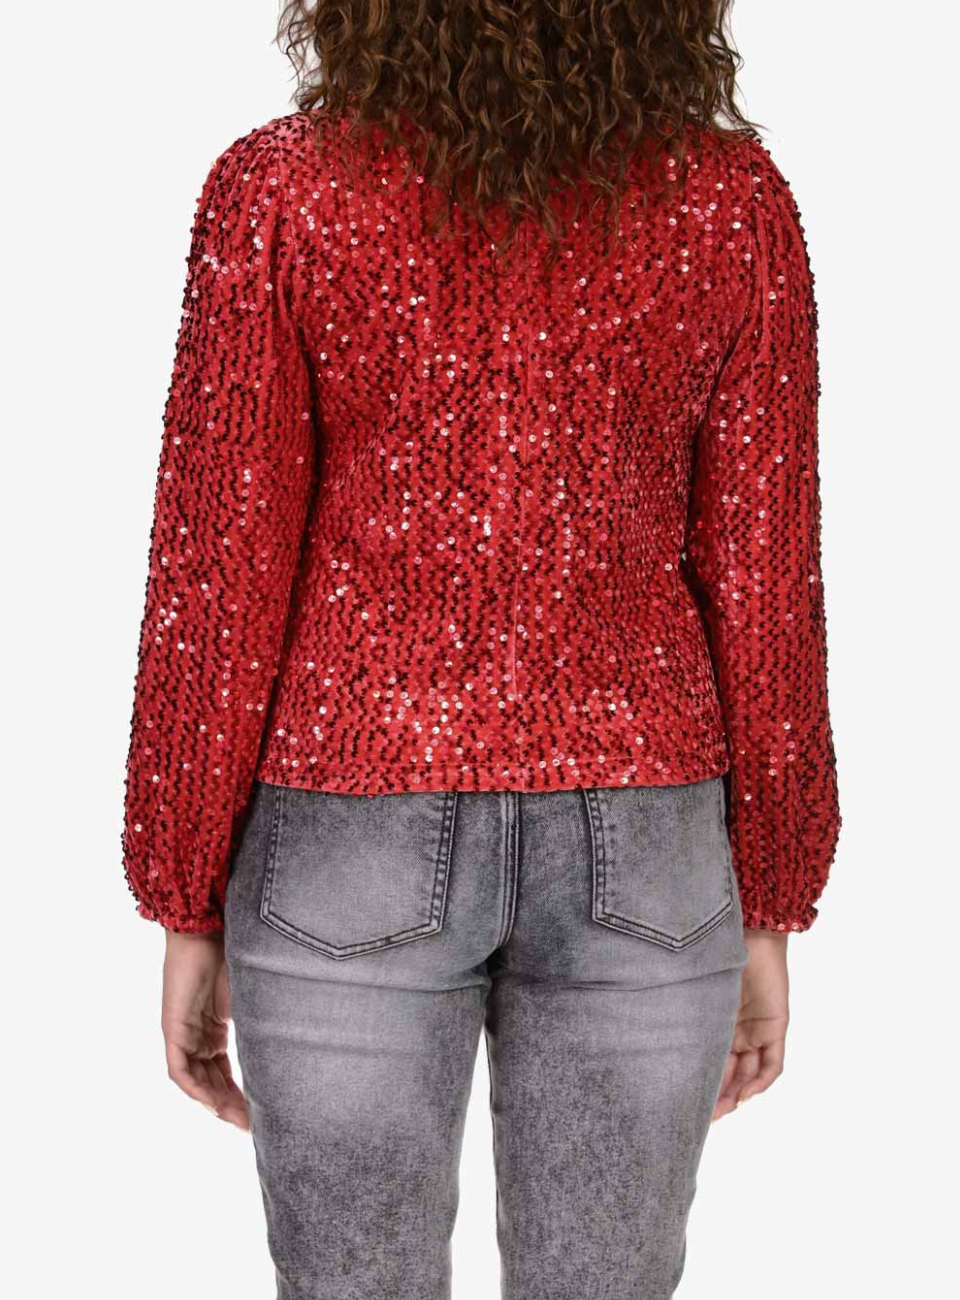 All Nighter Mock Neck Red Sequin Top**FINAL SALE**